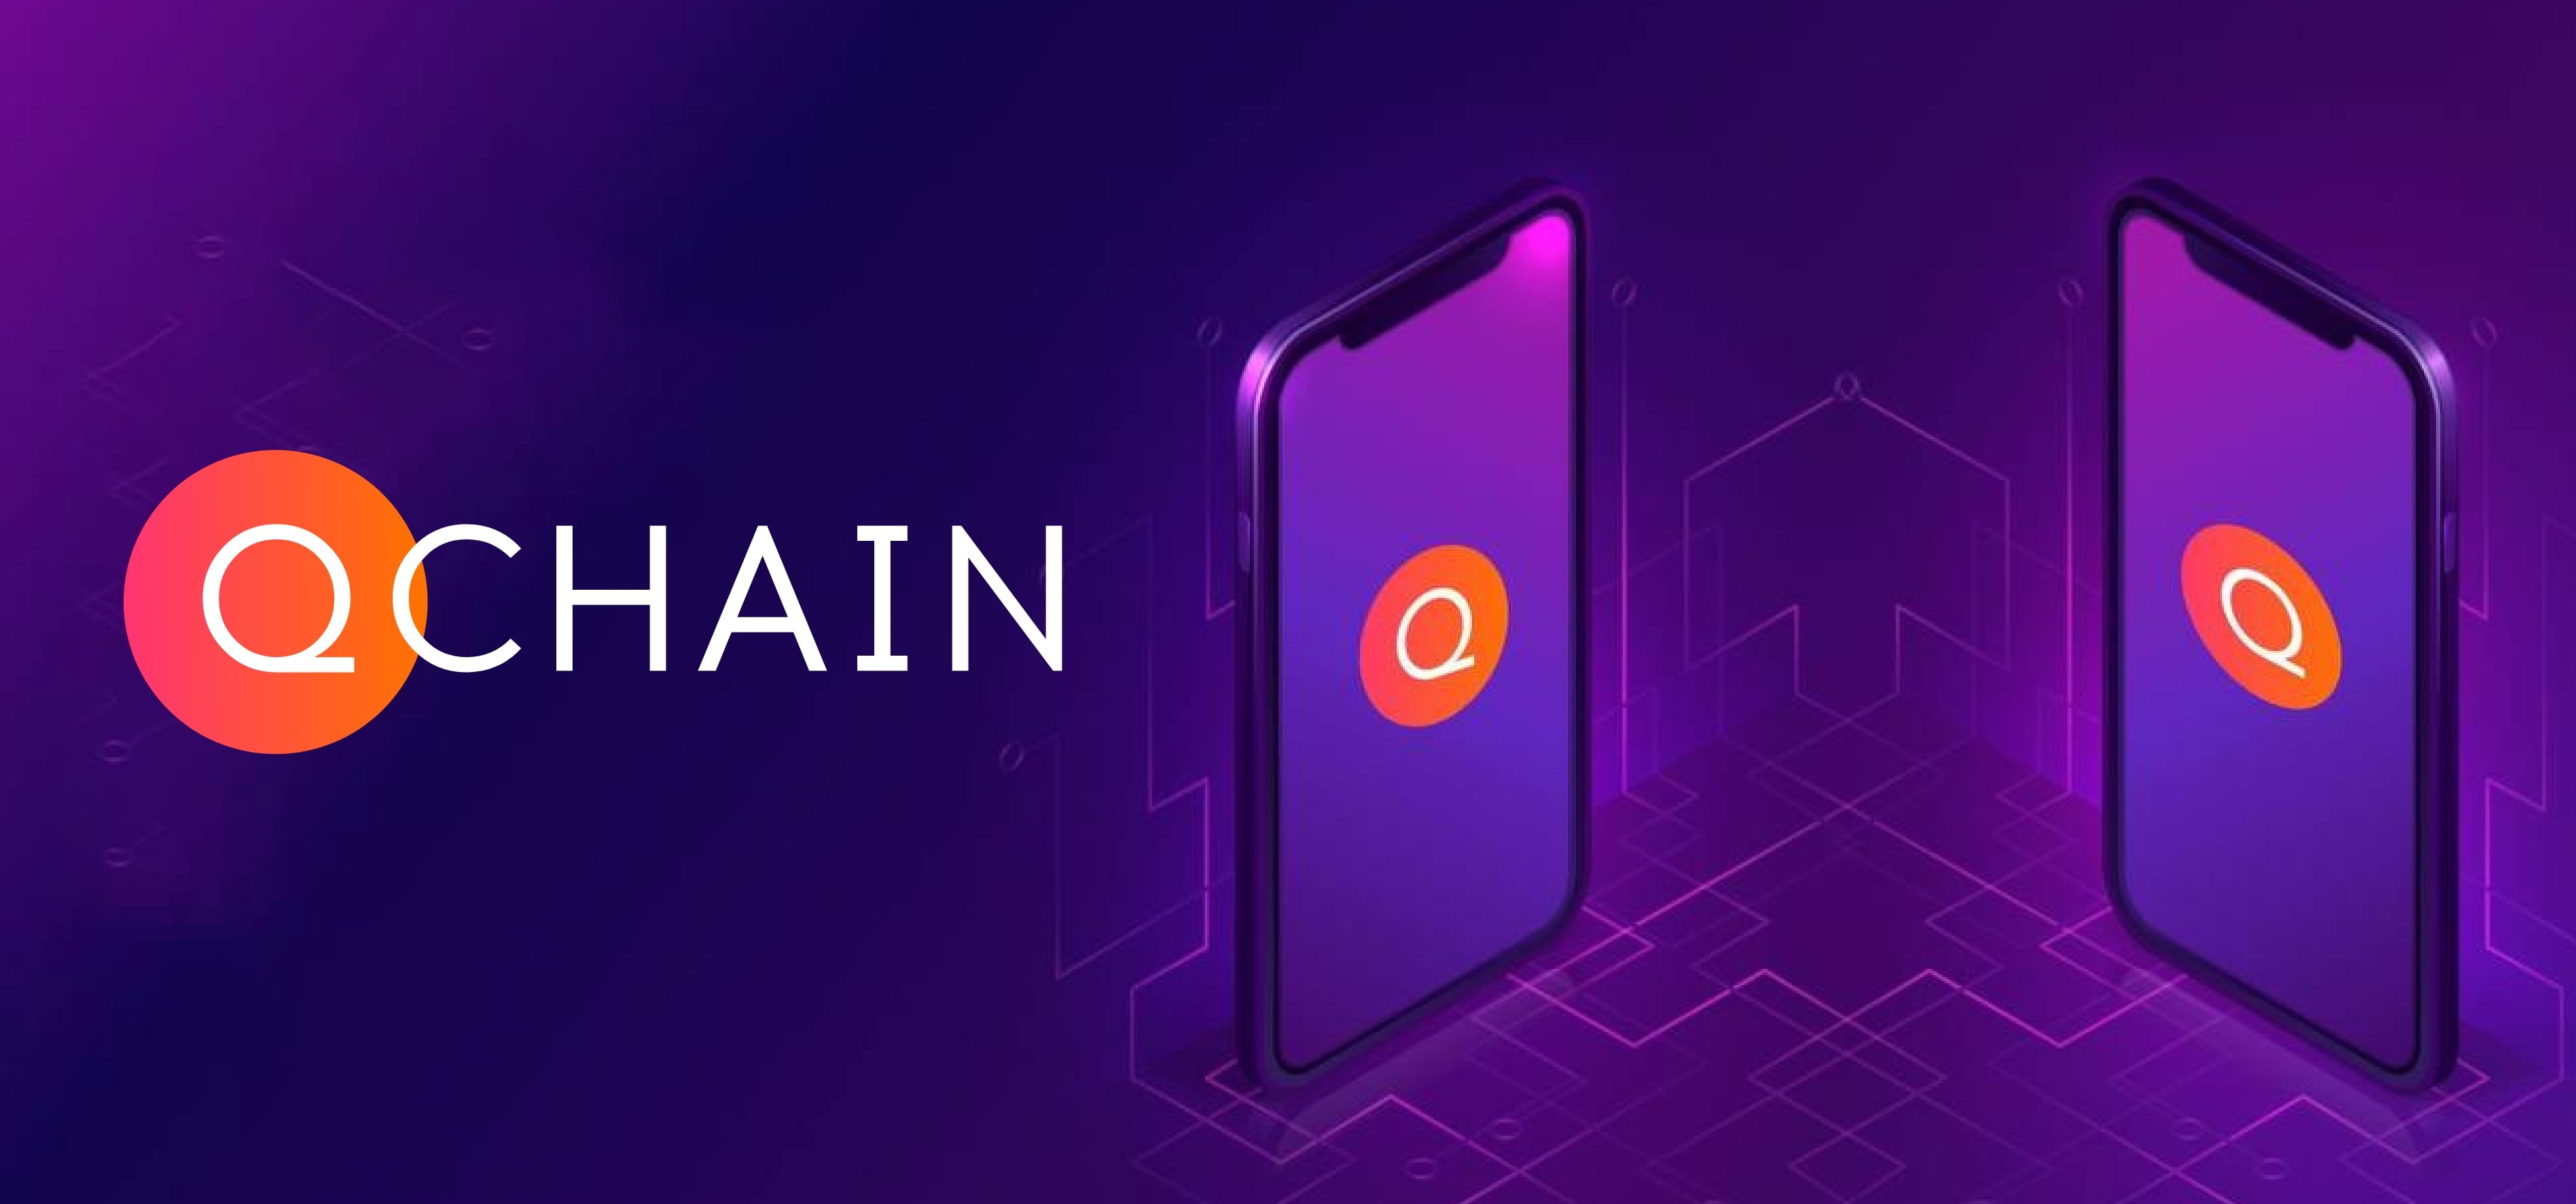 QCHAIN NODE is available for all iOS devices